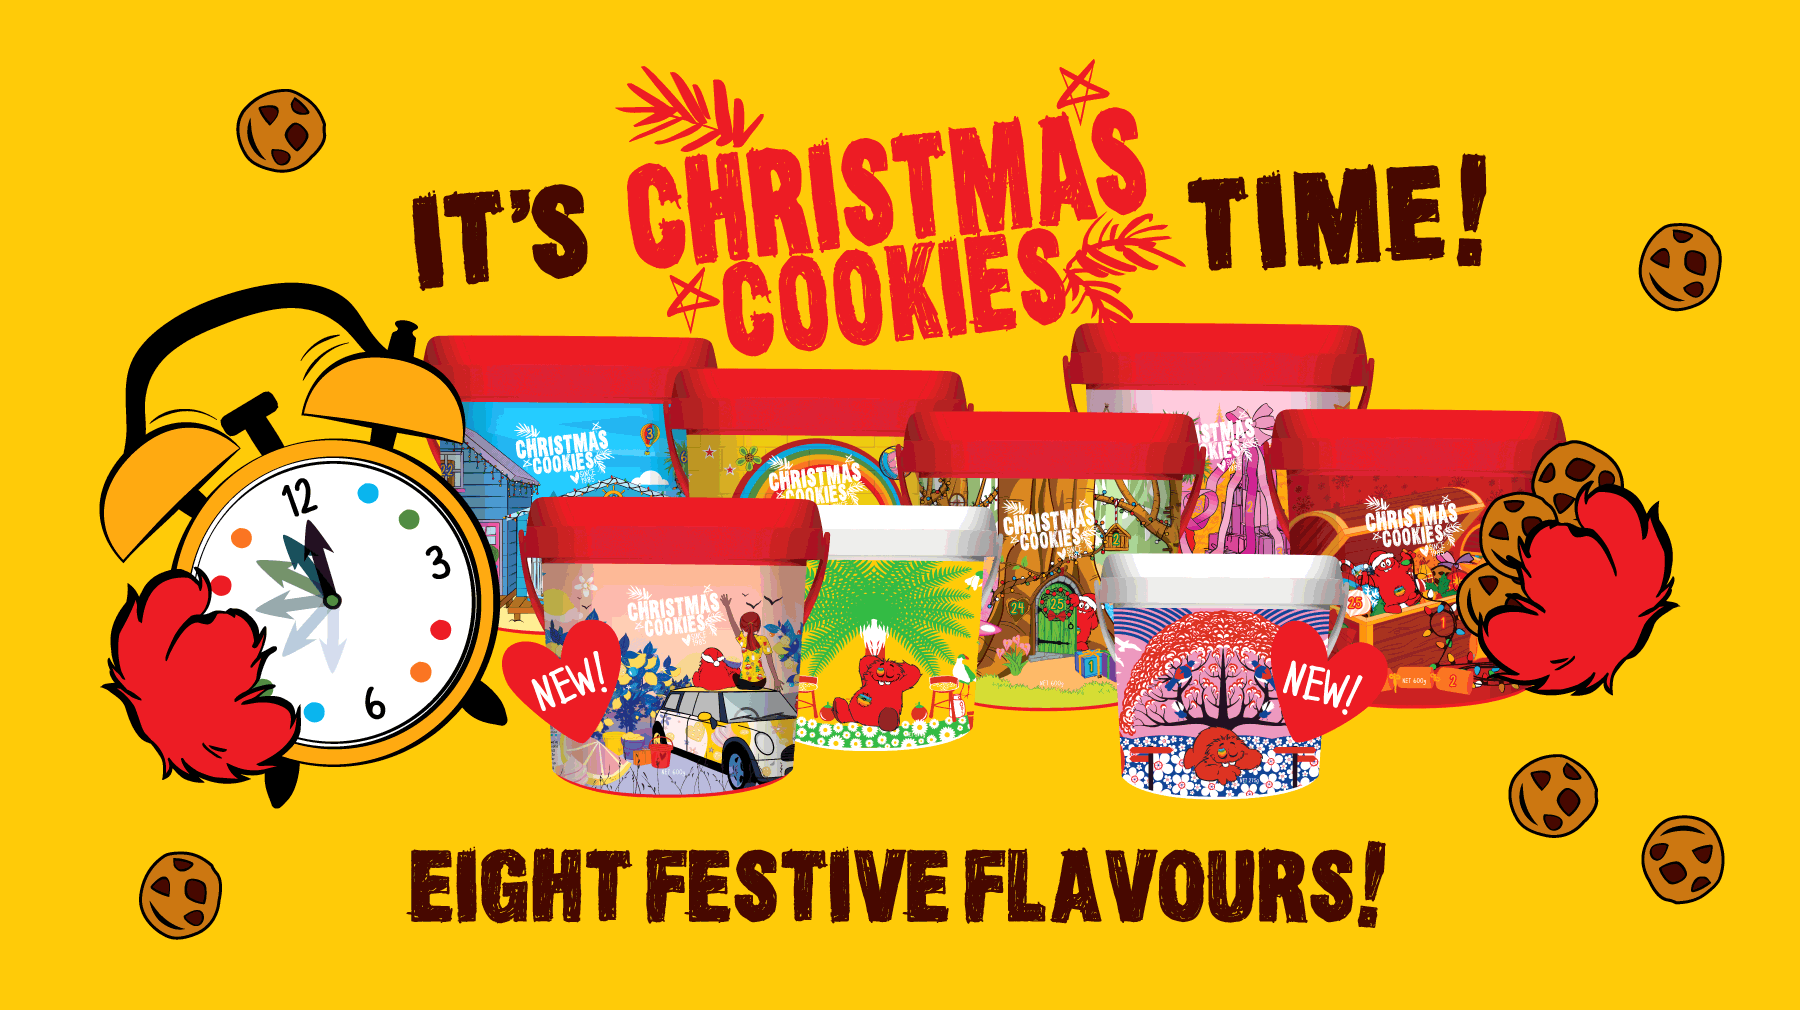 It's Christmas Cookies Time! Eight festive flavours!